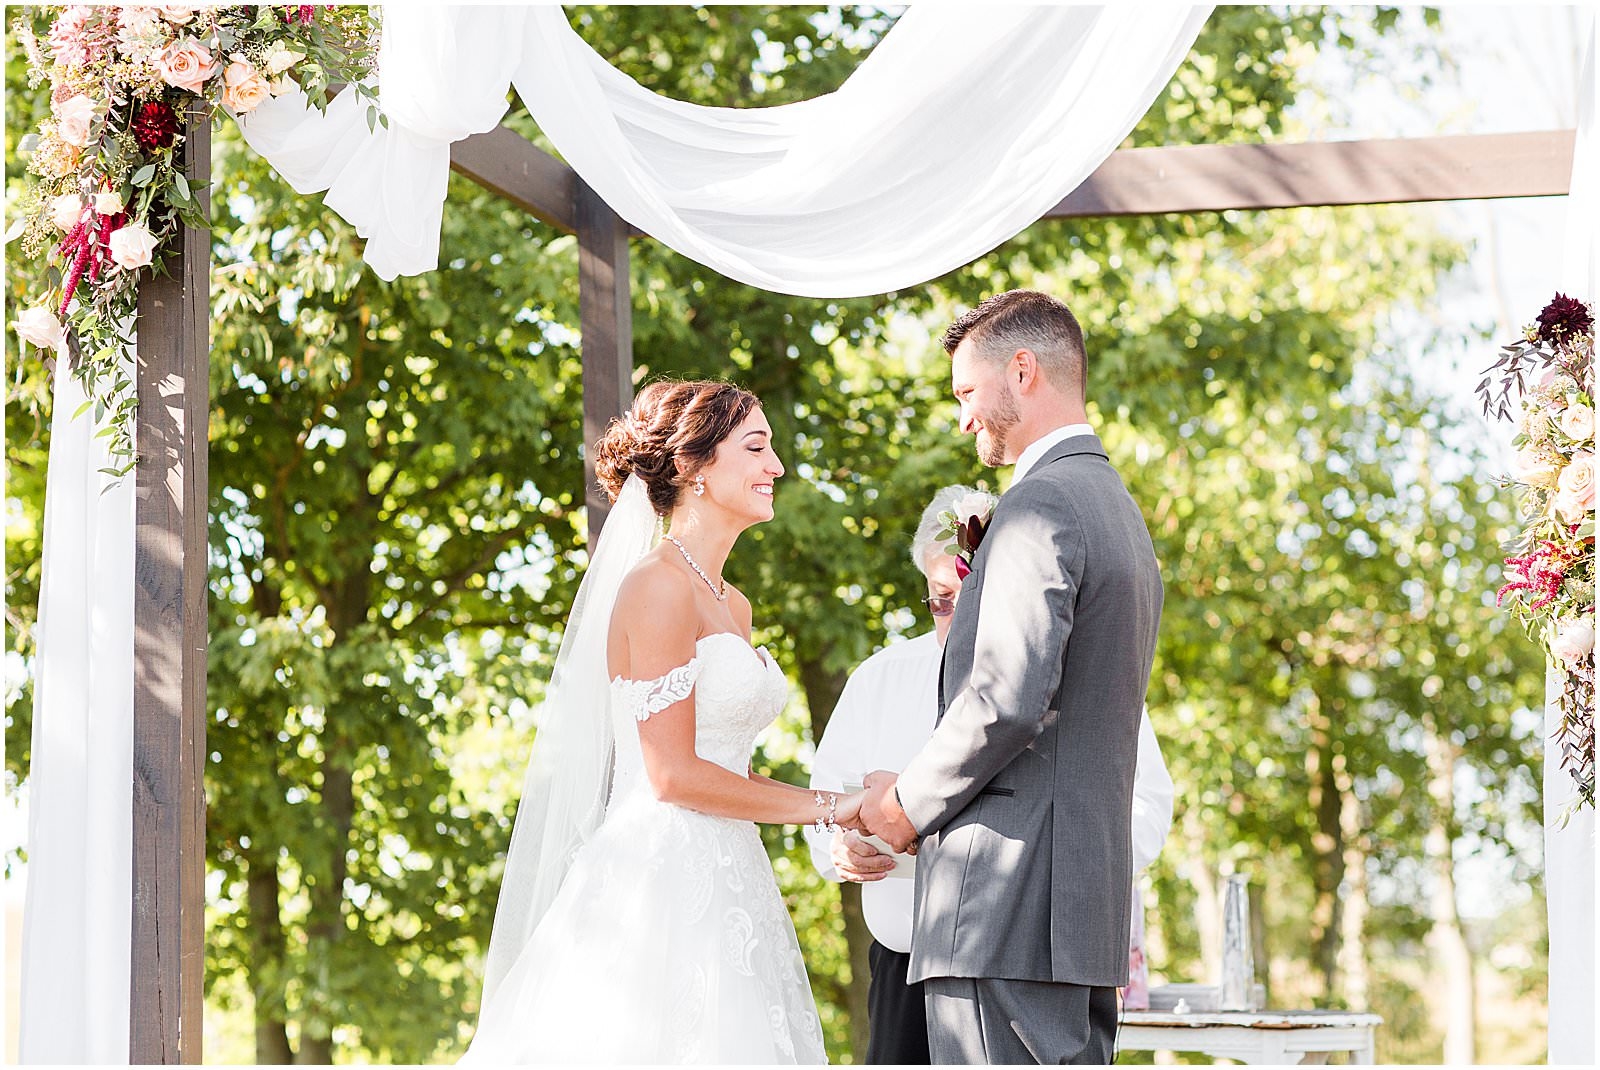 A Stunning Fall Wedding in Indianapolis, IN |. Sally and Andrew | Bret and Brandie Photography 0104.jpg